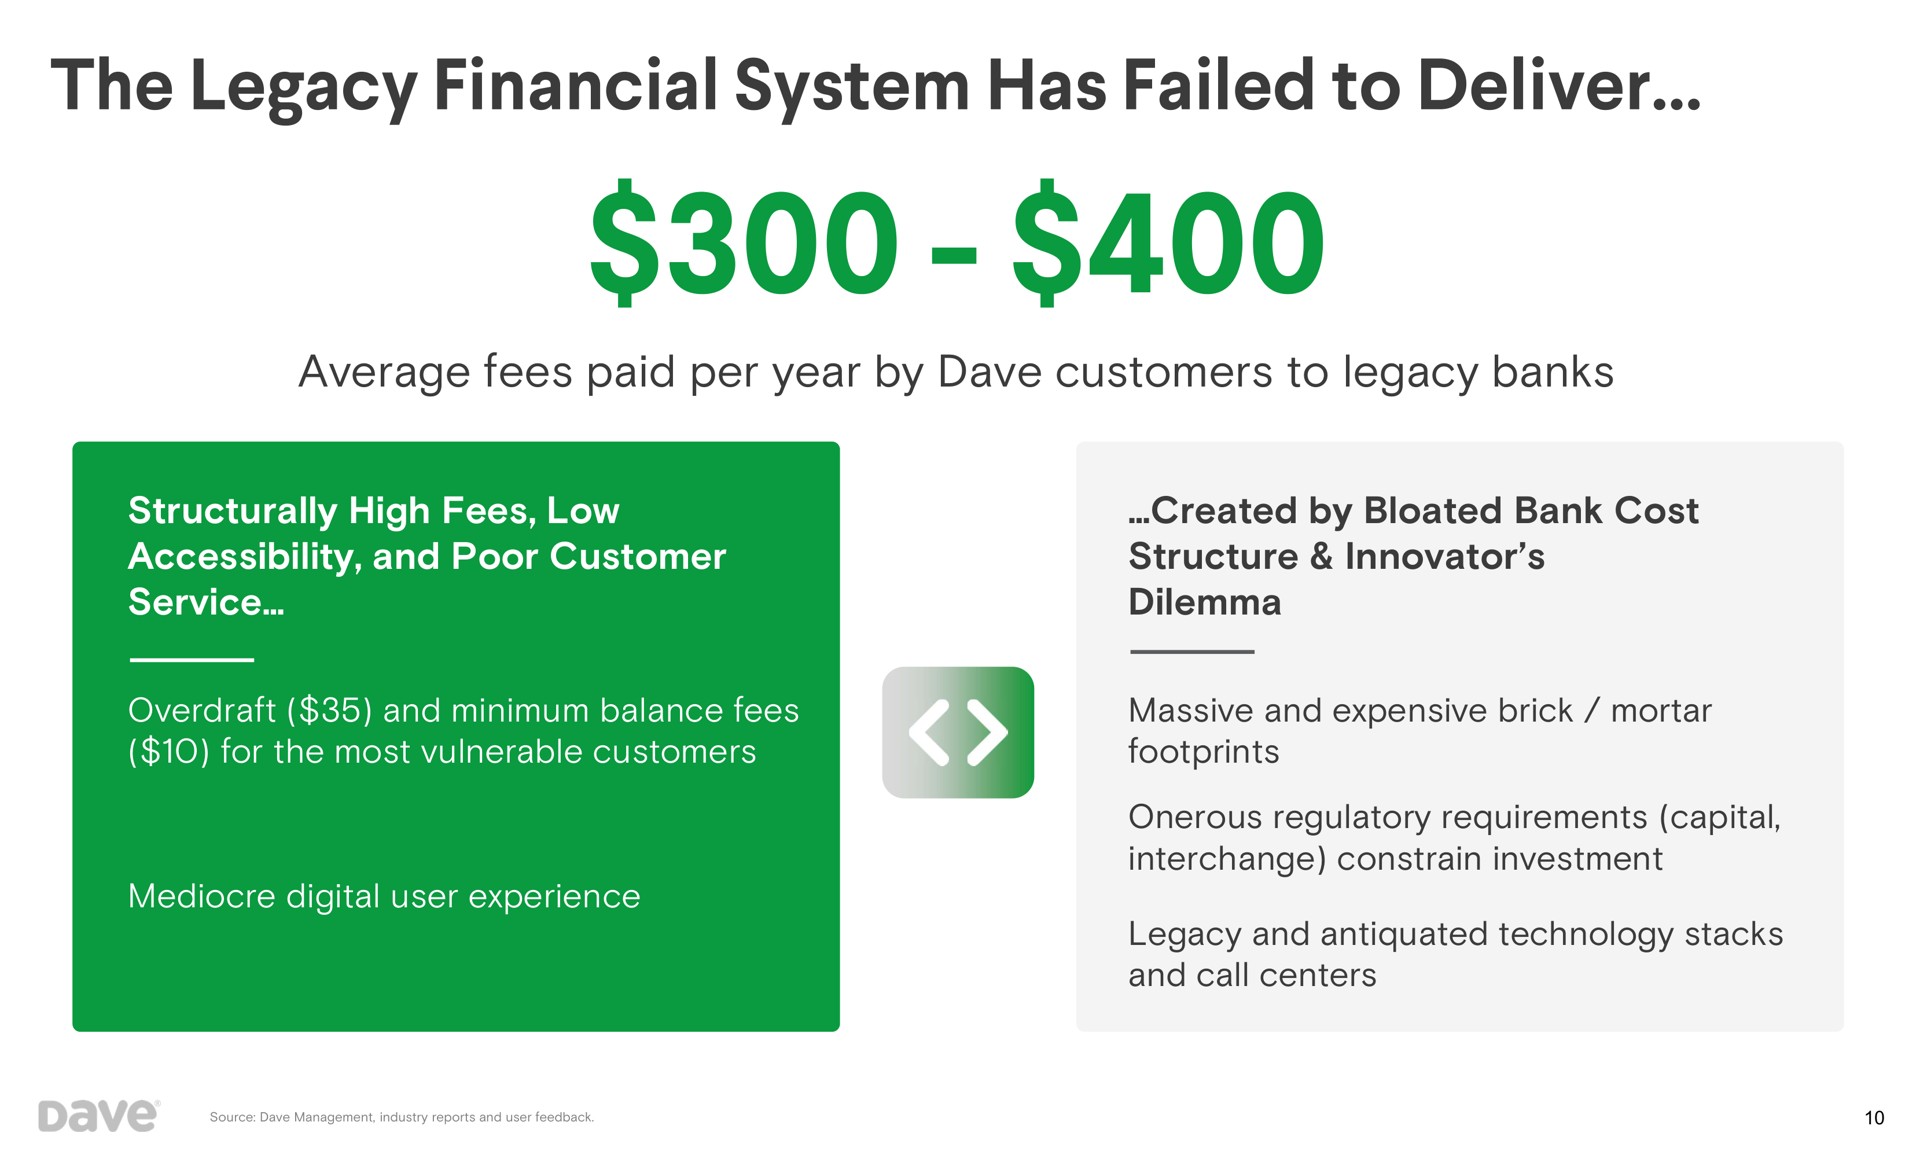 average fees paid per year by customers to legacy banks structurally high fees low accessibility and poor customer service created by bloated bank cost structure innovator dilemma the financial system has failed deliver | Dave